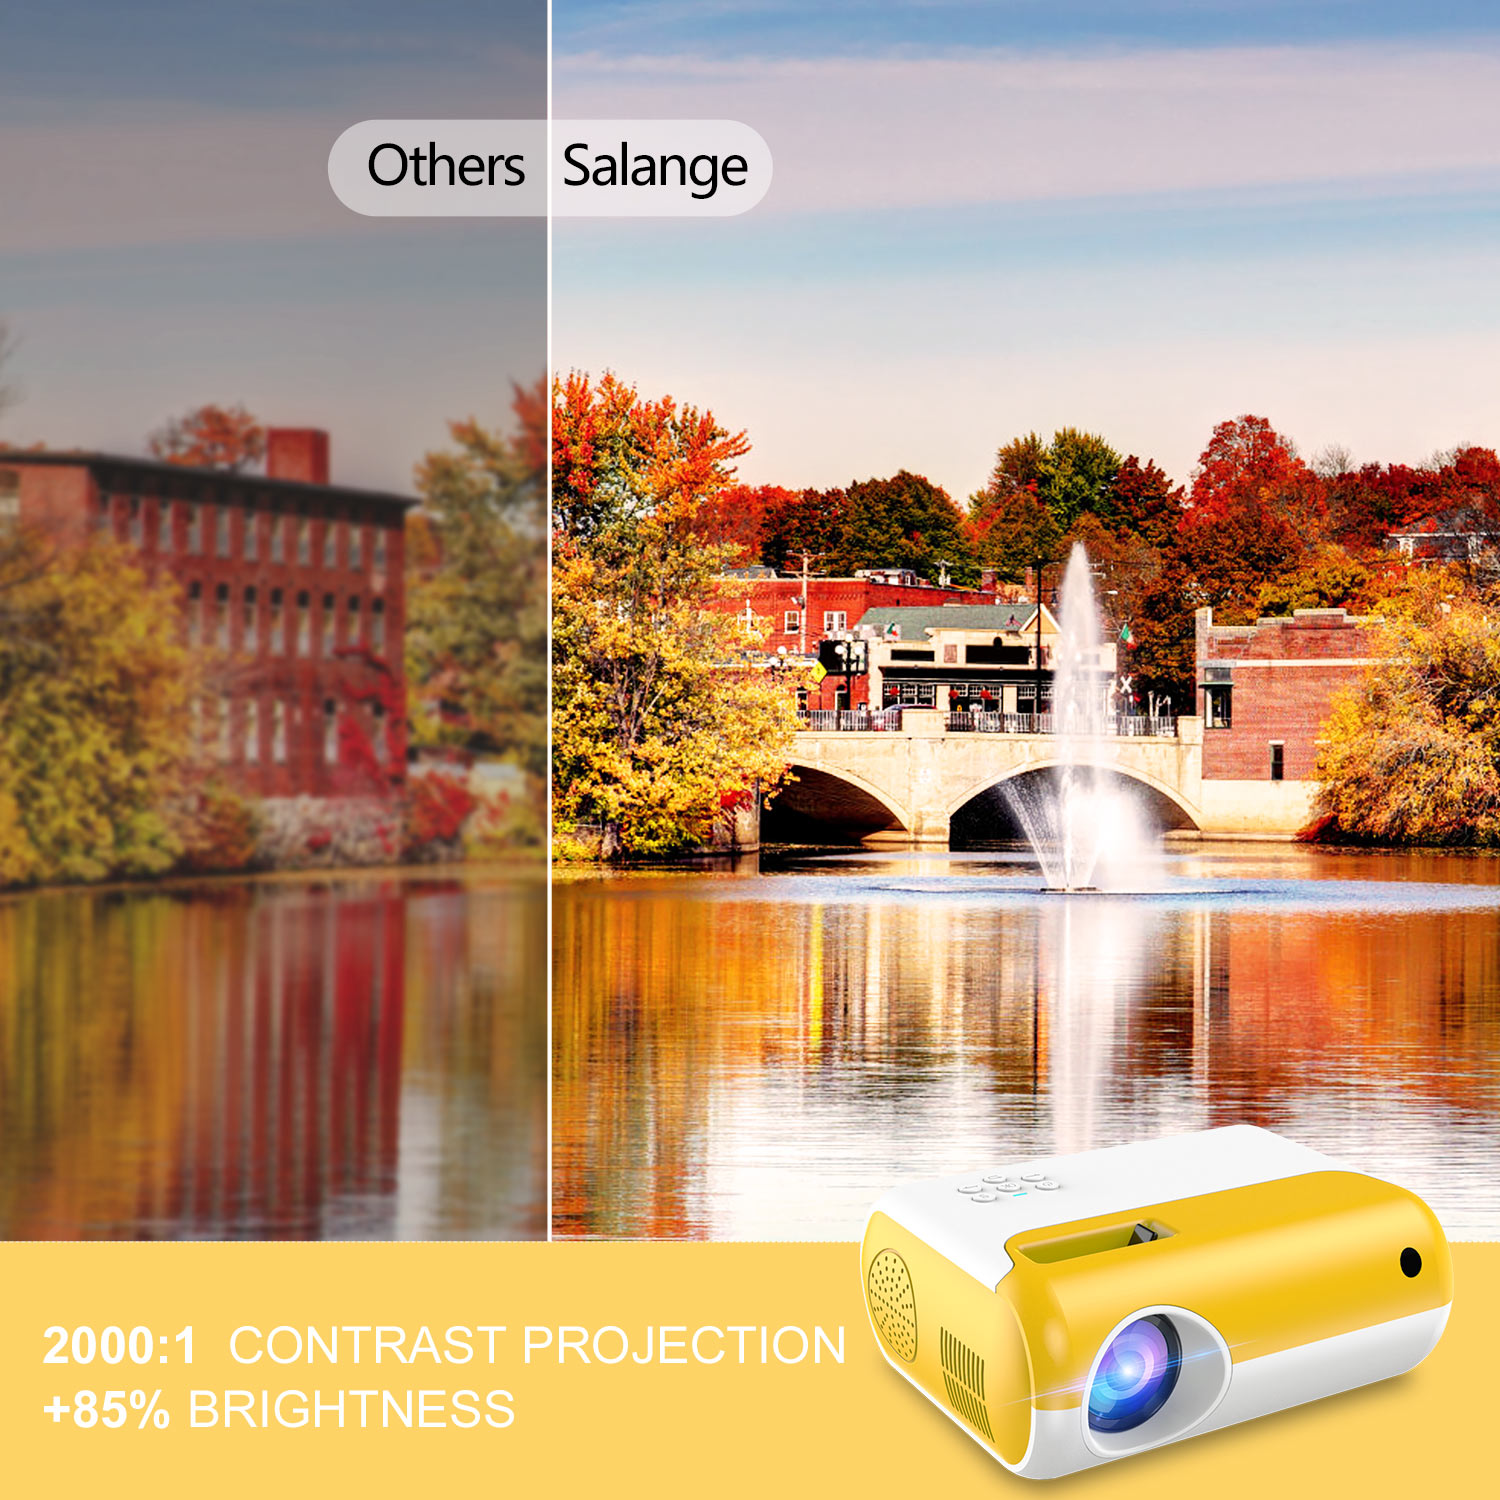 Salange P80 Led Mini Projector 800x480dpi 2800 Lumen Portable Projetor 1080P Supported Proyector for Home Theater Video Beamer